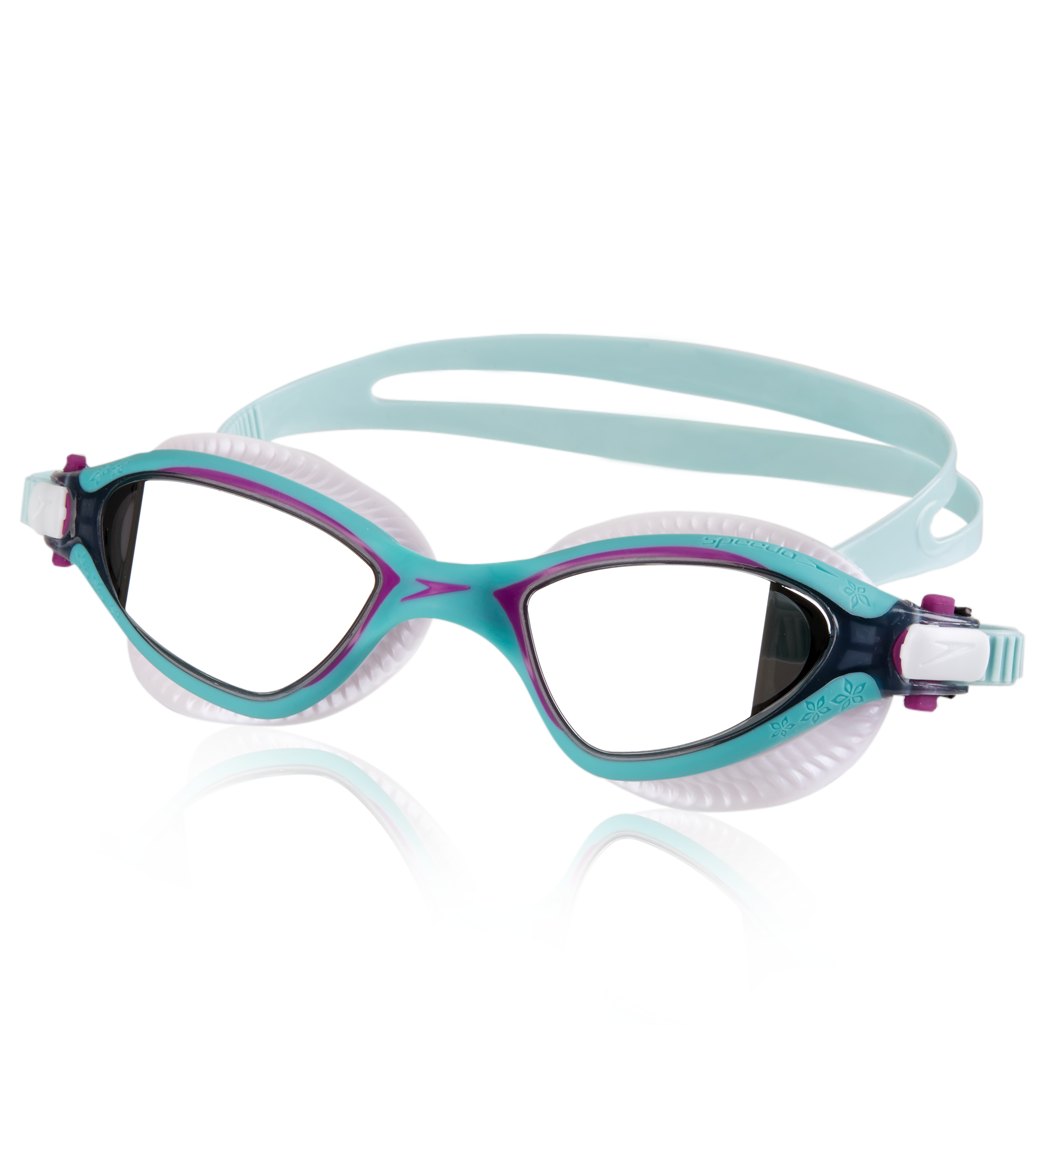 Speedo Womens MDR 2.4 Mirrored Goggle at SwimOutlet